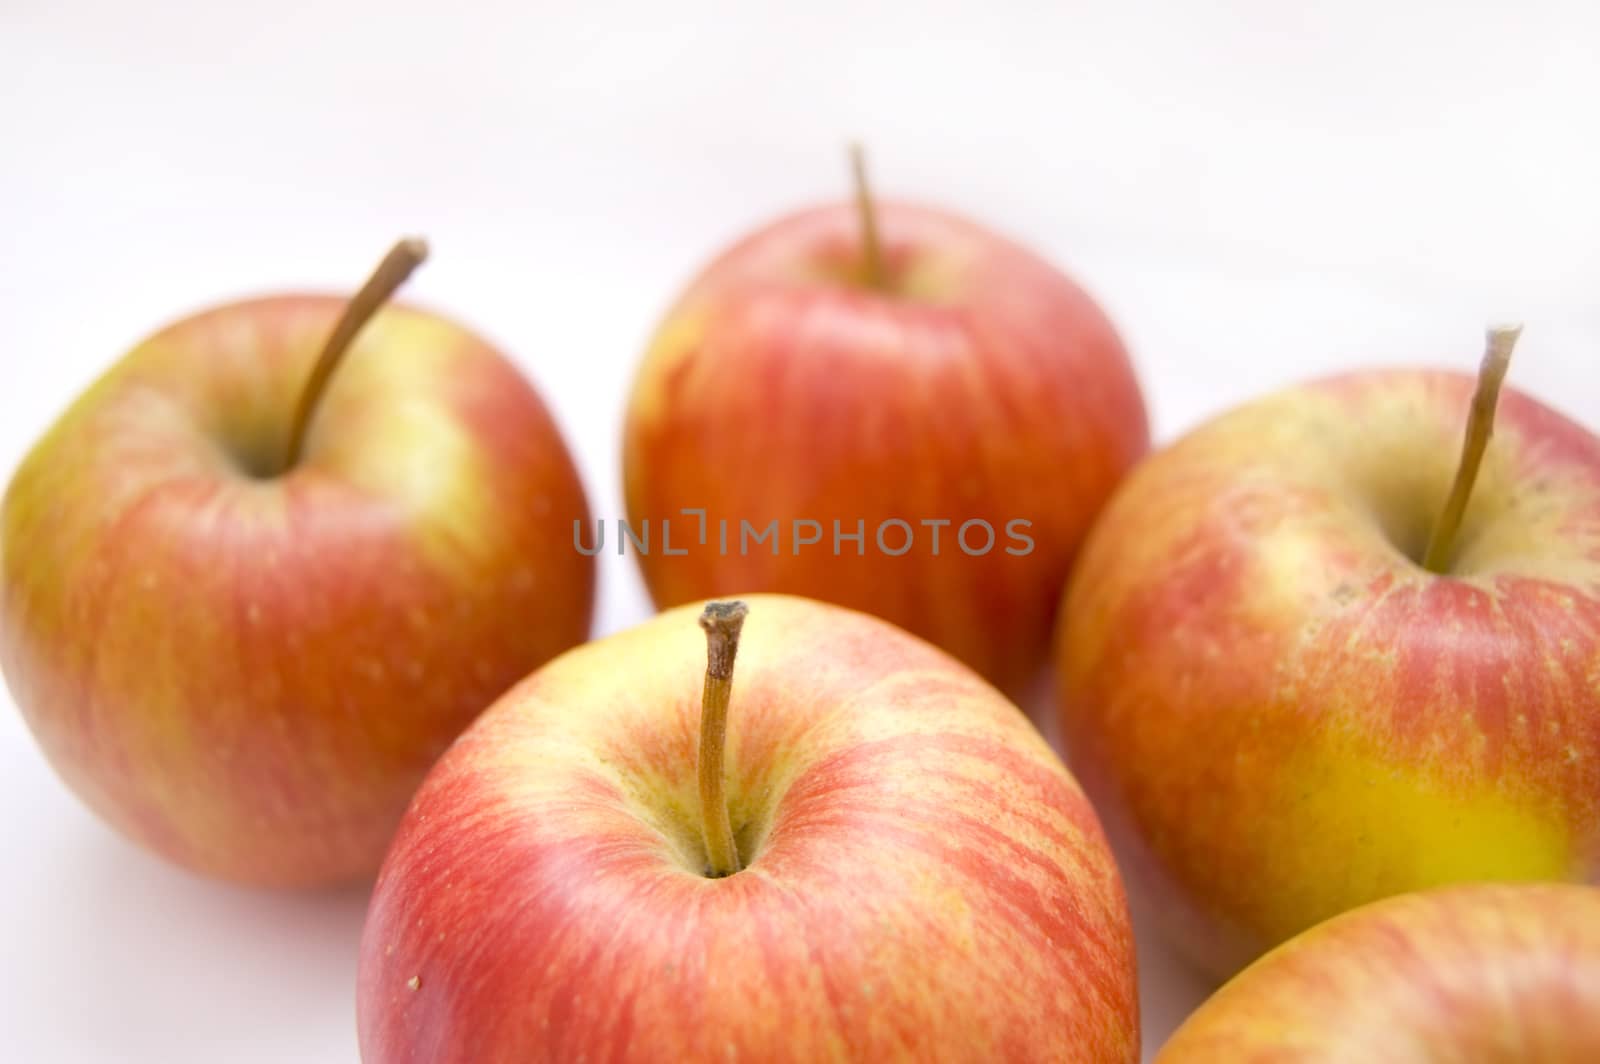 Apples conceptual image. Apples on isolated background.